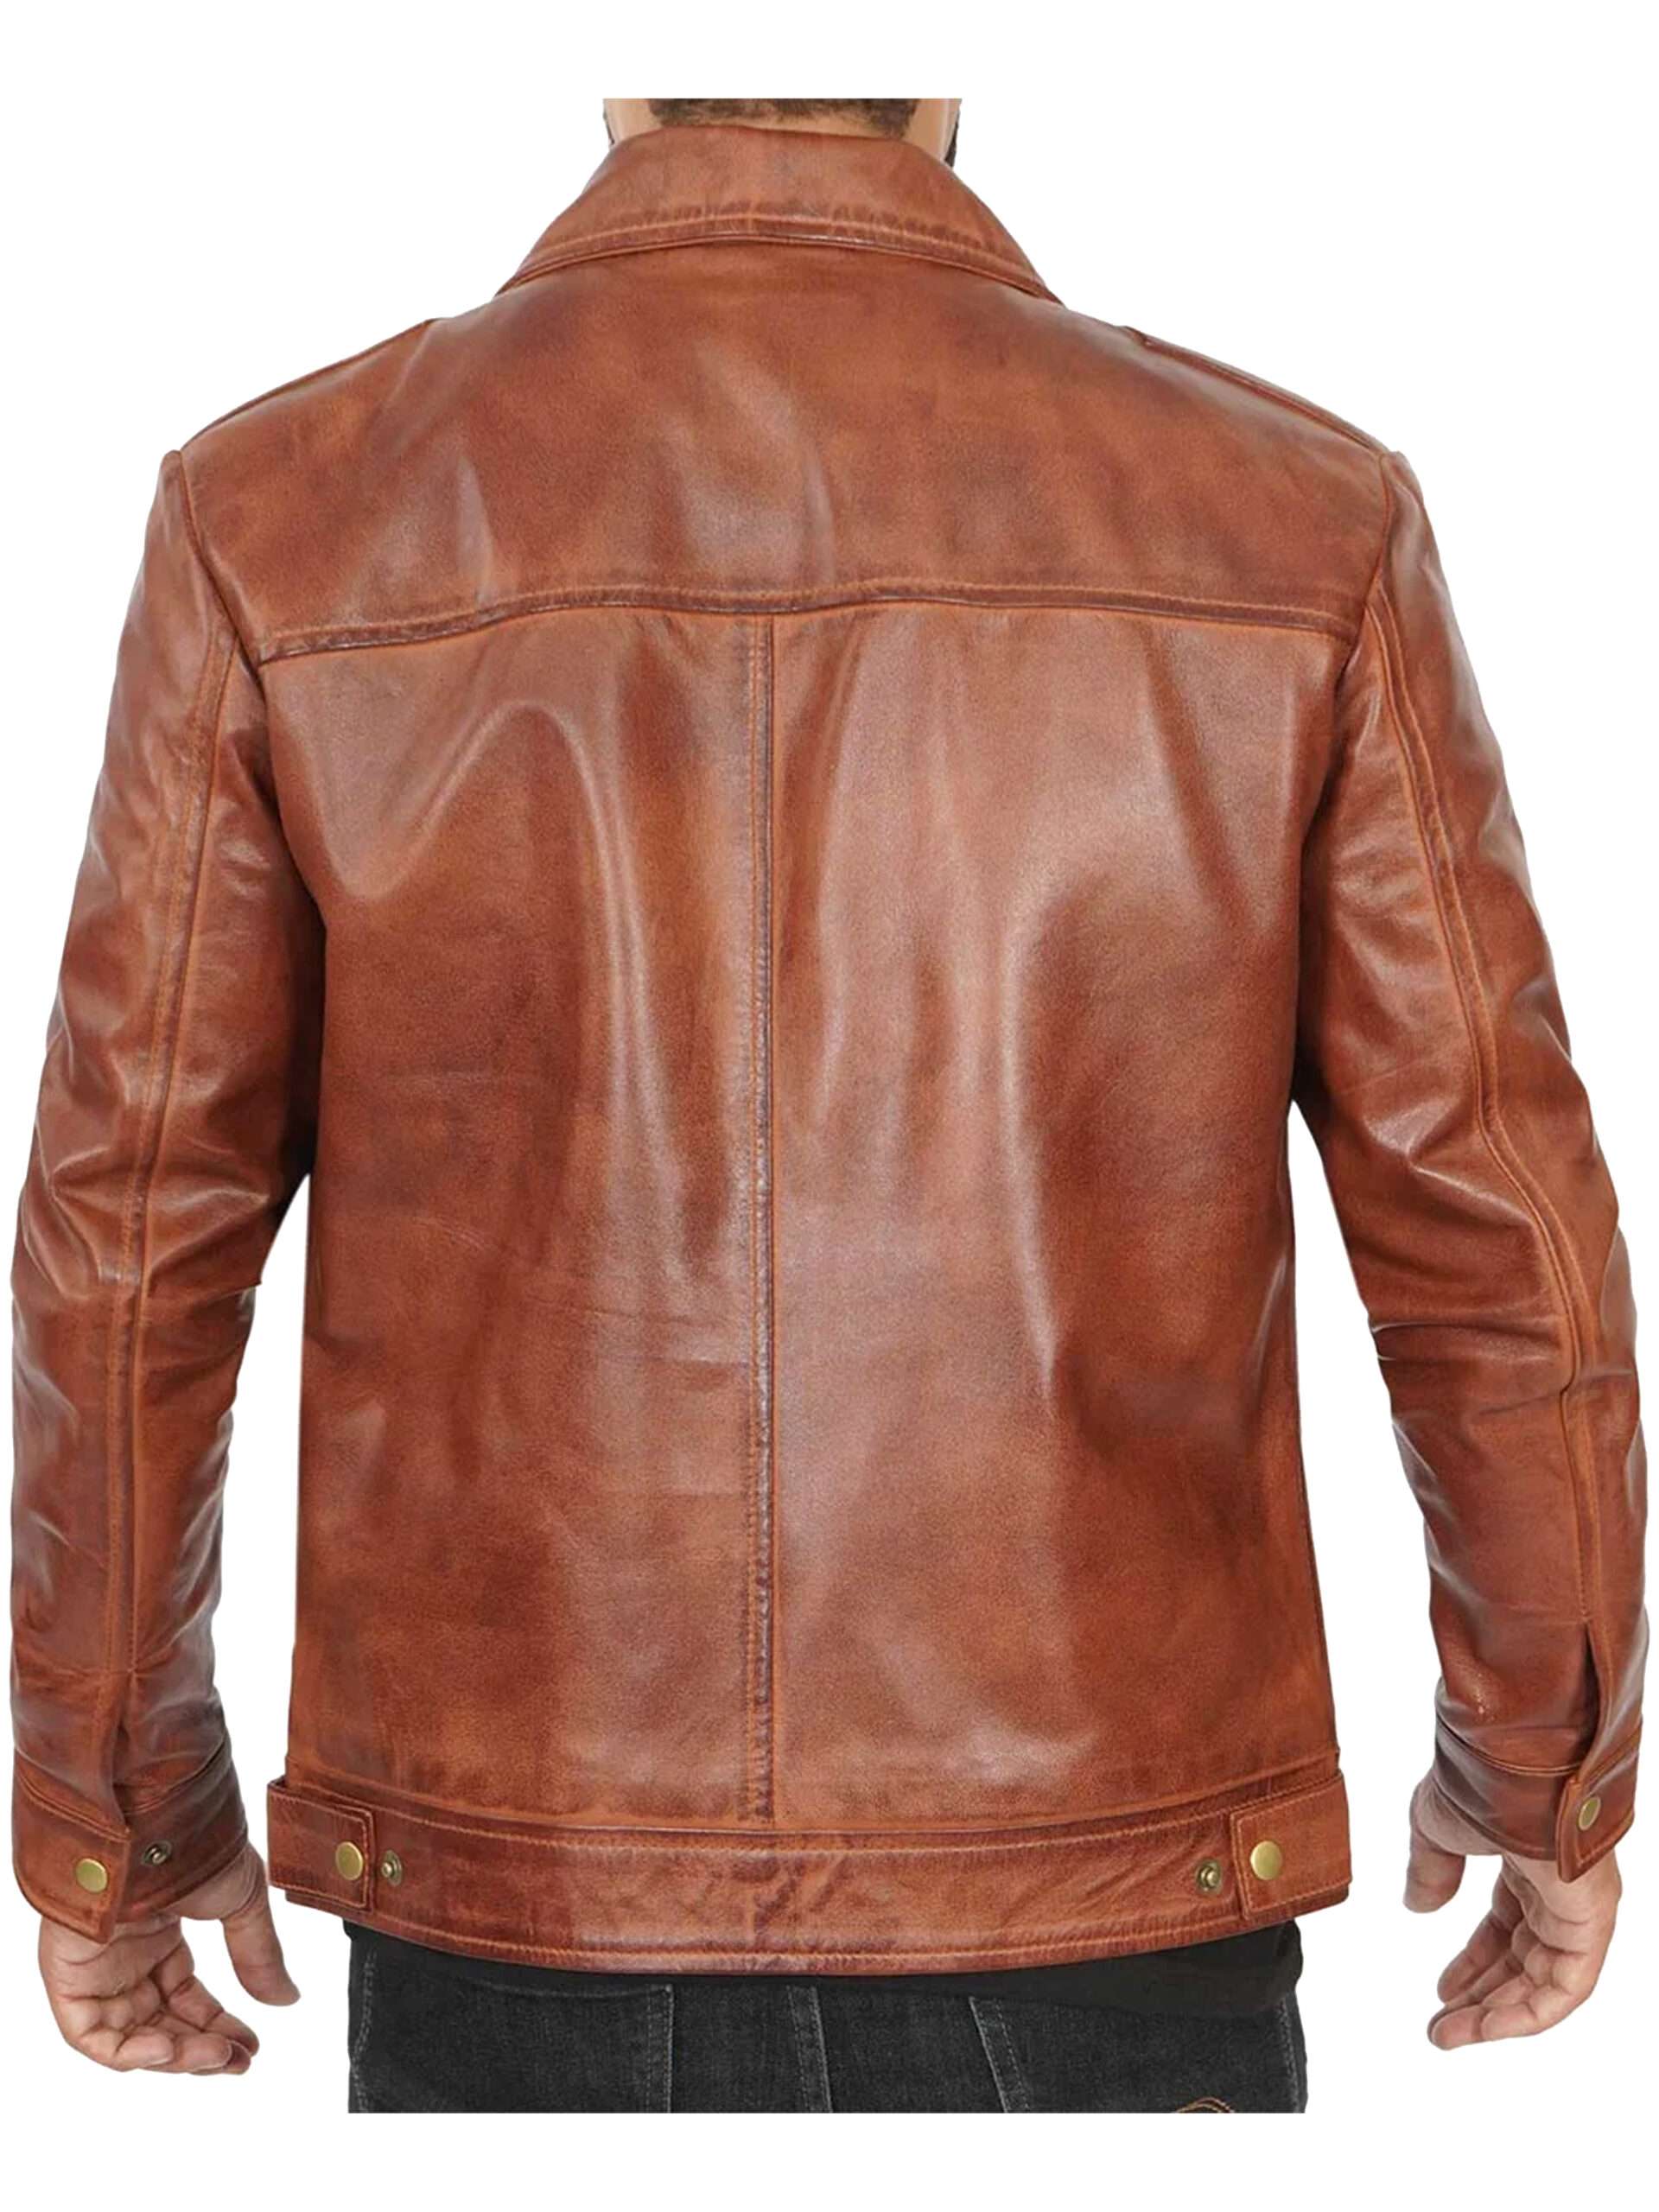 Shirt Collar Style Real Leather Vintage Brown Leather Jacket For Men